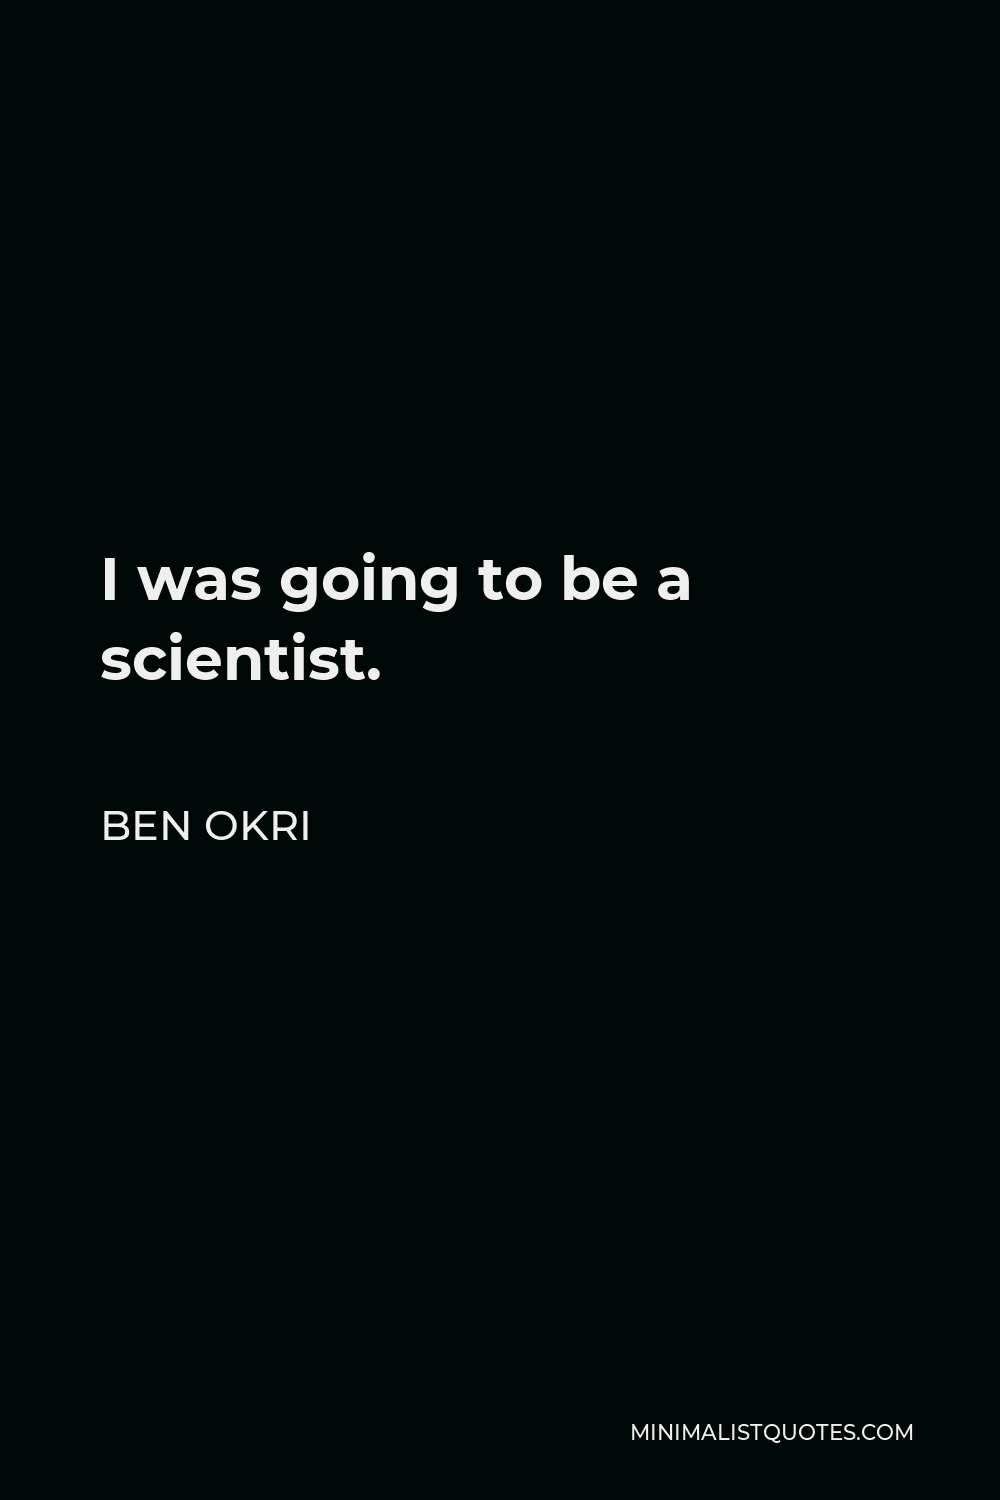 Ben Okri Quote - I was going to be a scientist.